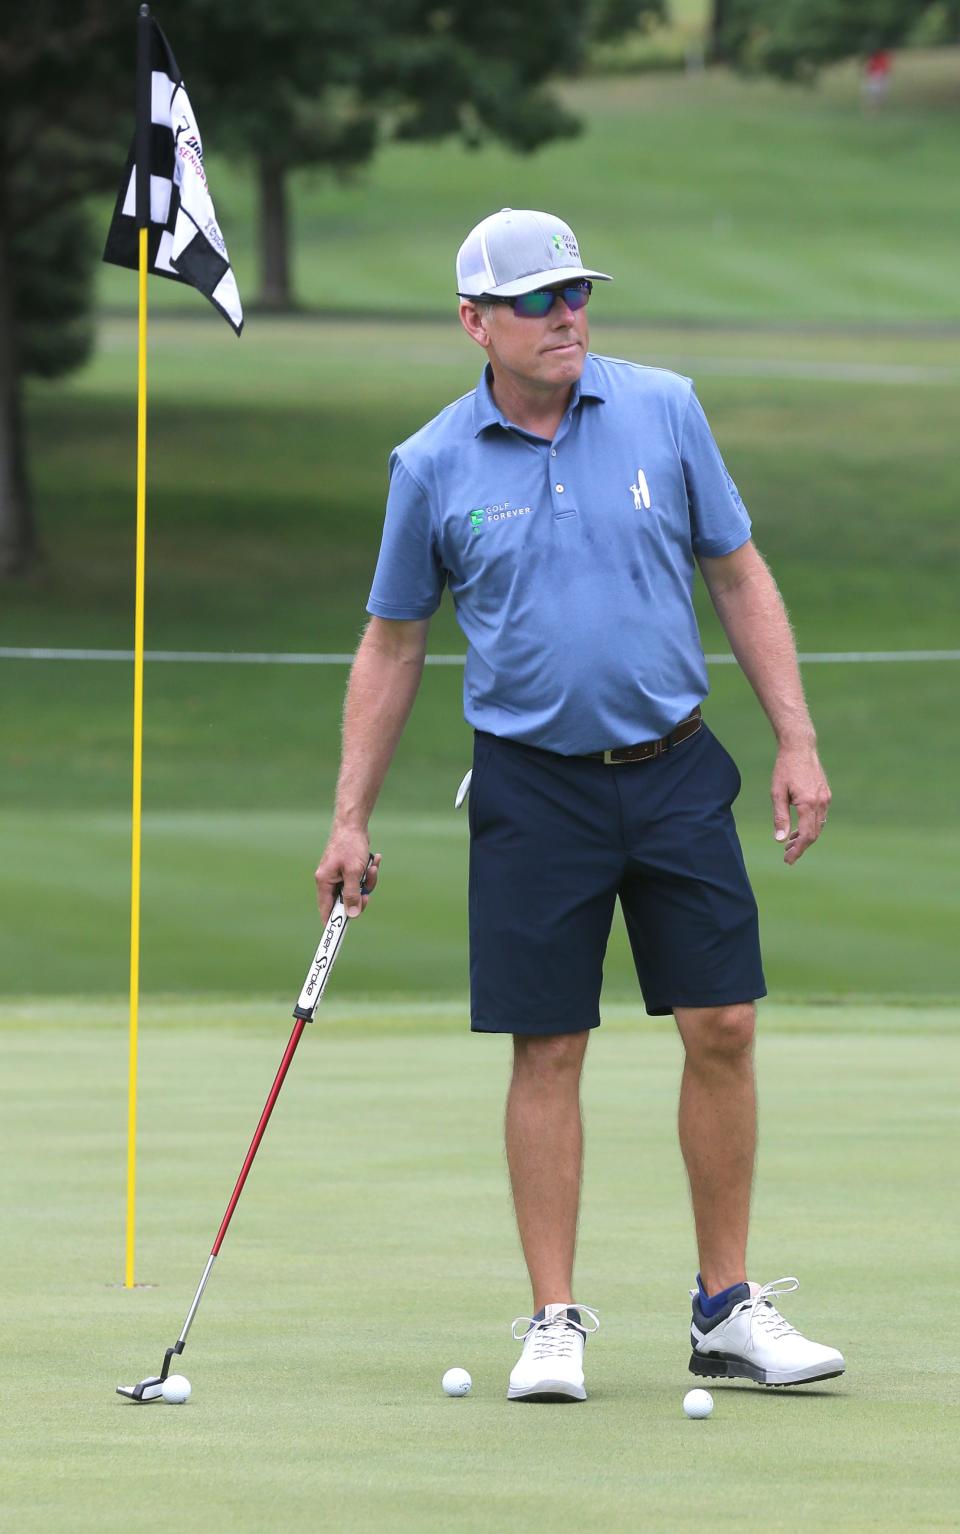 Justin Leonard gets warmed up on the practice tee at the Bridgestone Senior Players Championship Pro-Am on Wednesday, July 6, 2022 in Akron, Ohio, at Firestone Country Club.